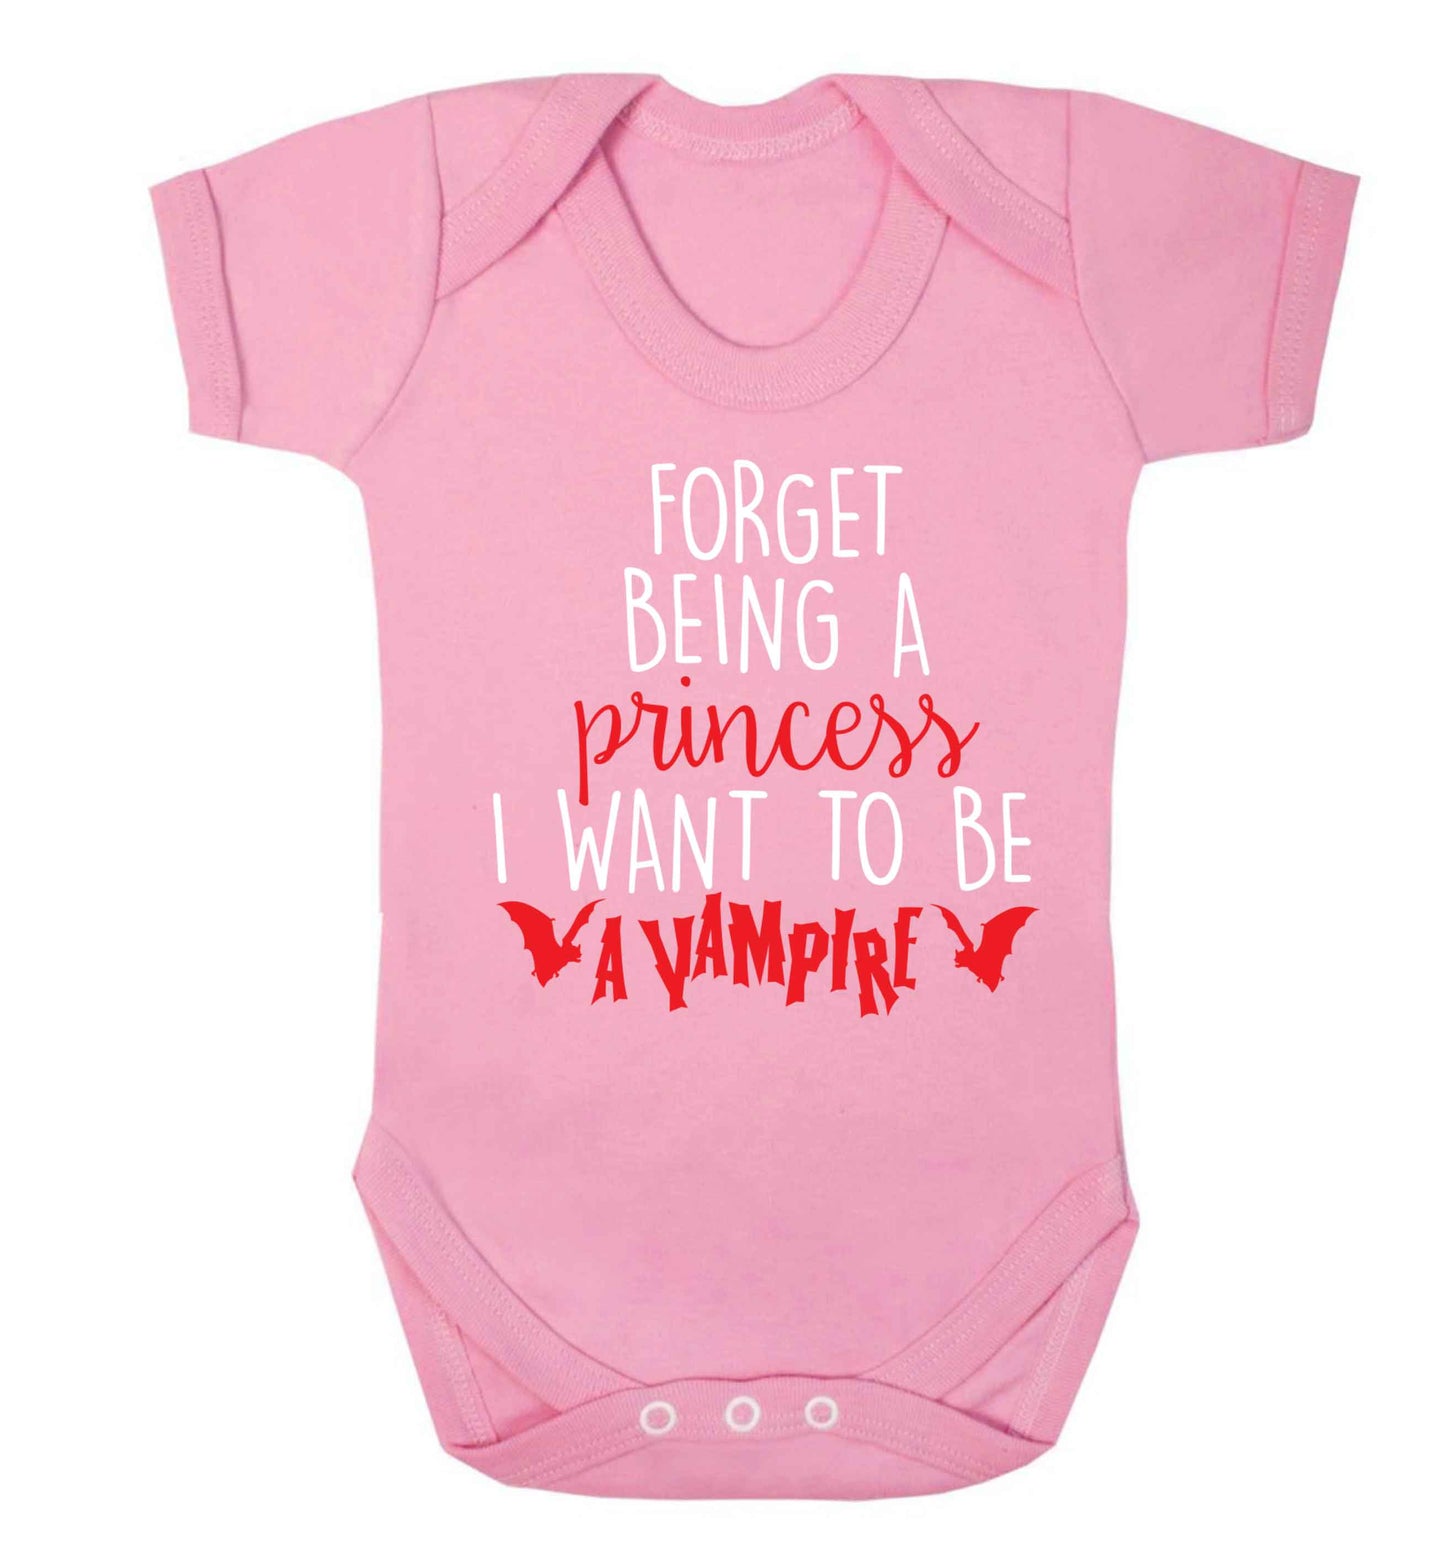 Forget being a princess I want to be a vampire Baby Vest pale pink 18-24 months